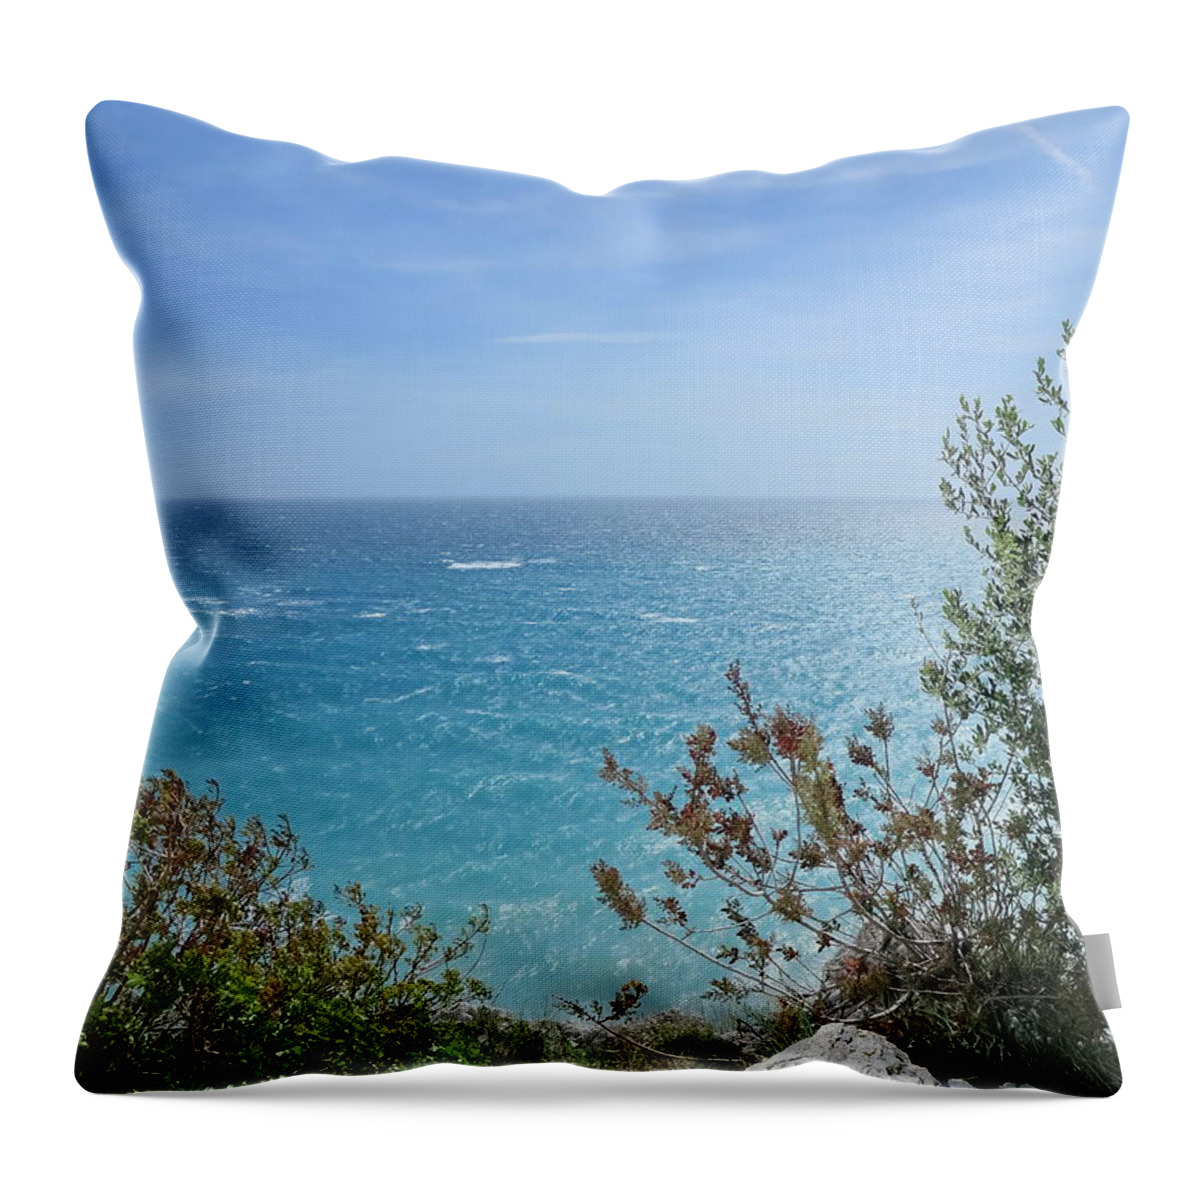 Tranquility Throw Pillow featuring the photograph Riviera by Rolfo